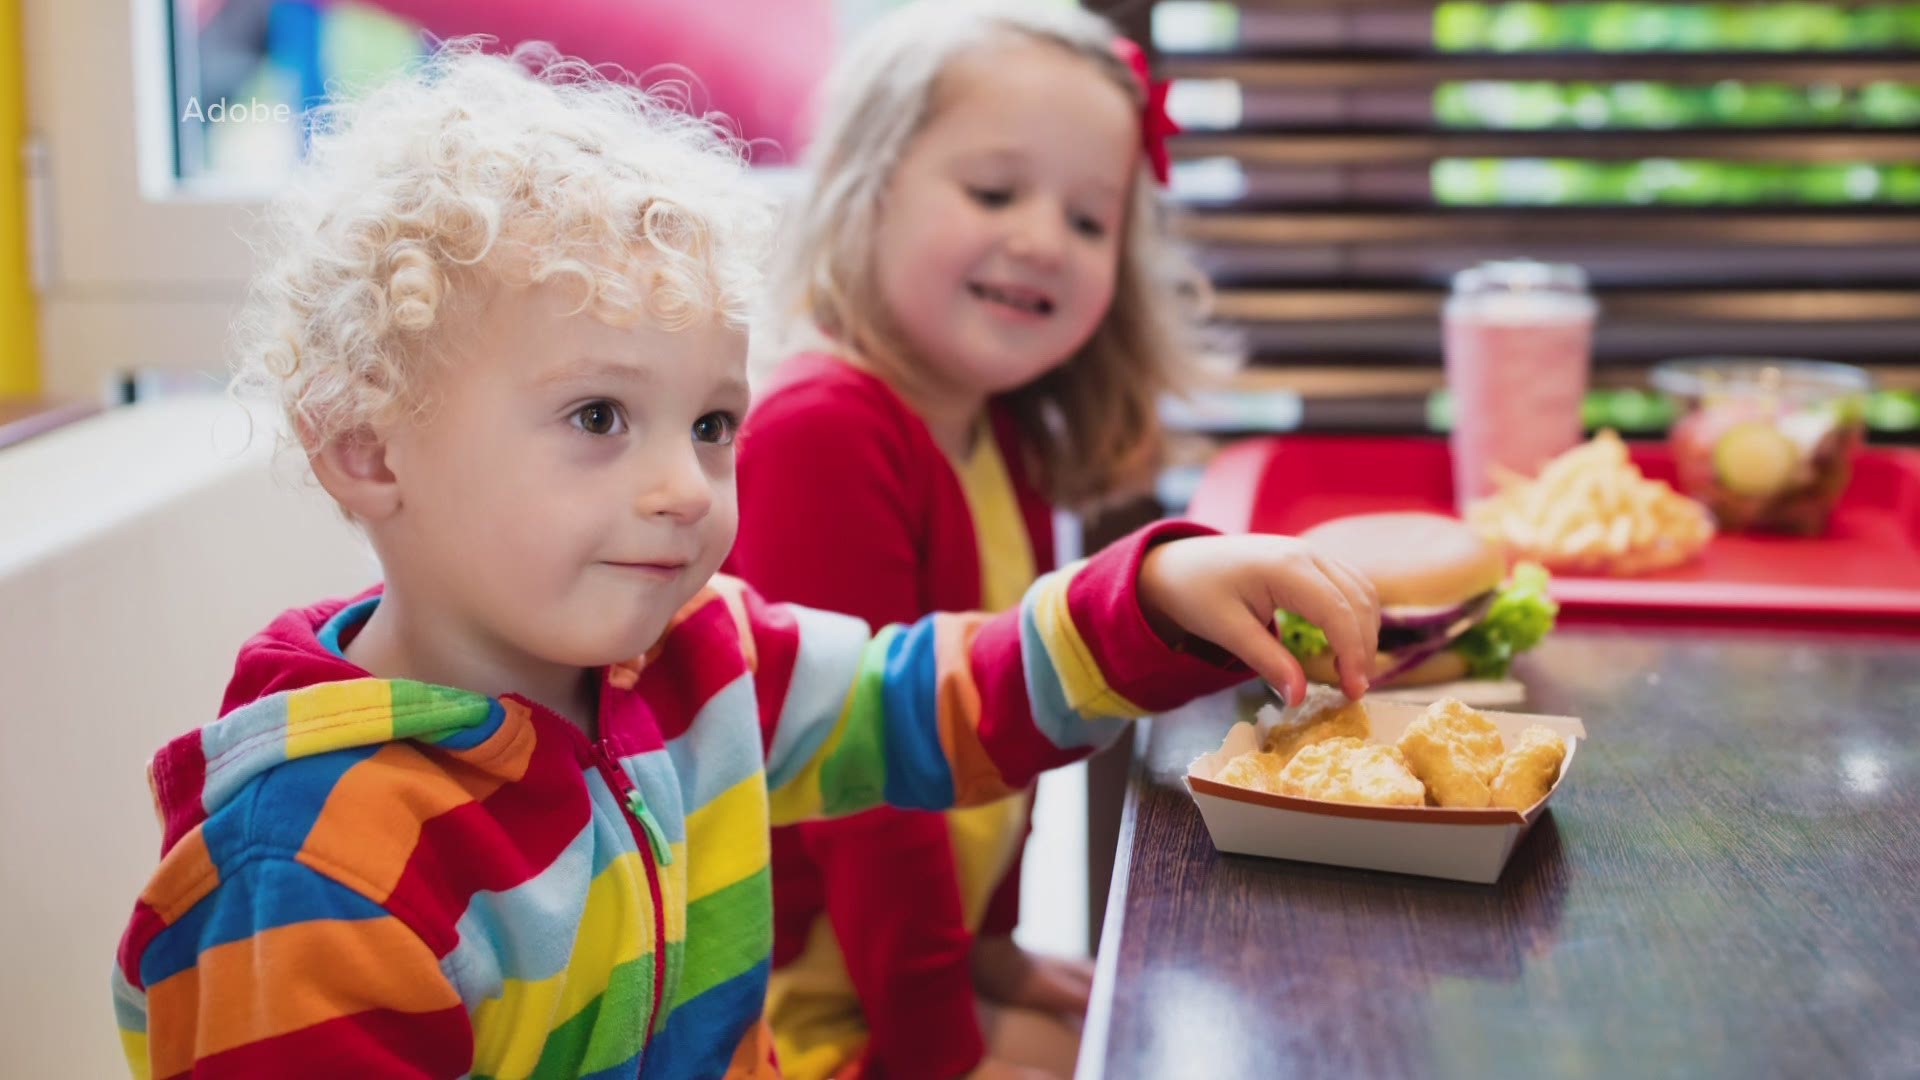 What children eat can have a significant impact on how they behave. Dr. Nicole Beurkens shares tips to keep their blood sugar regulated.